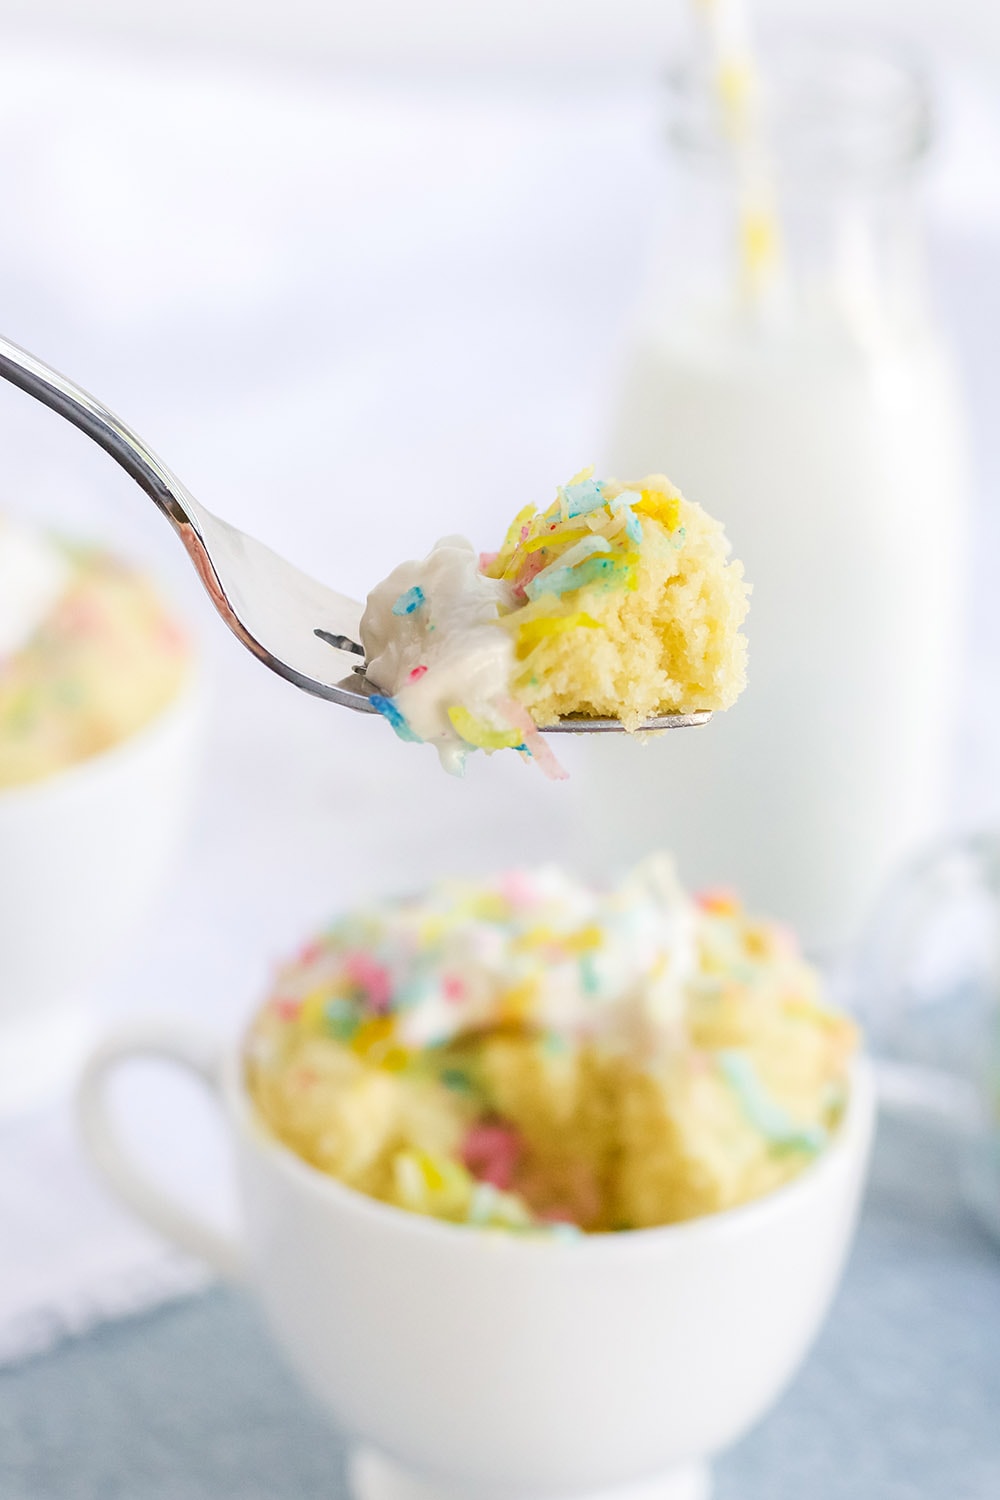 Fork full of confetti cake with mug in background.